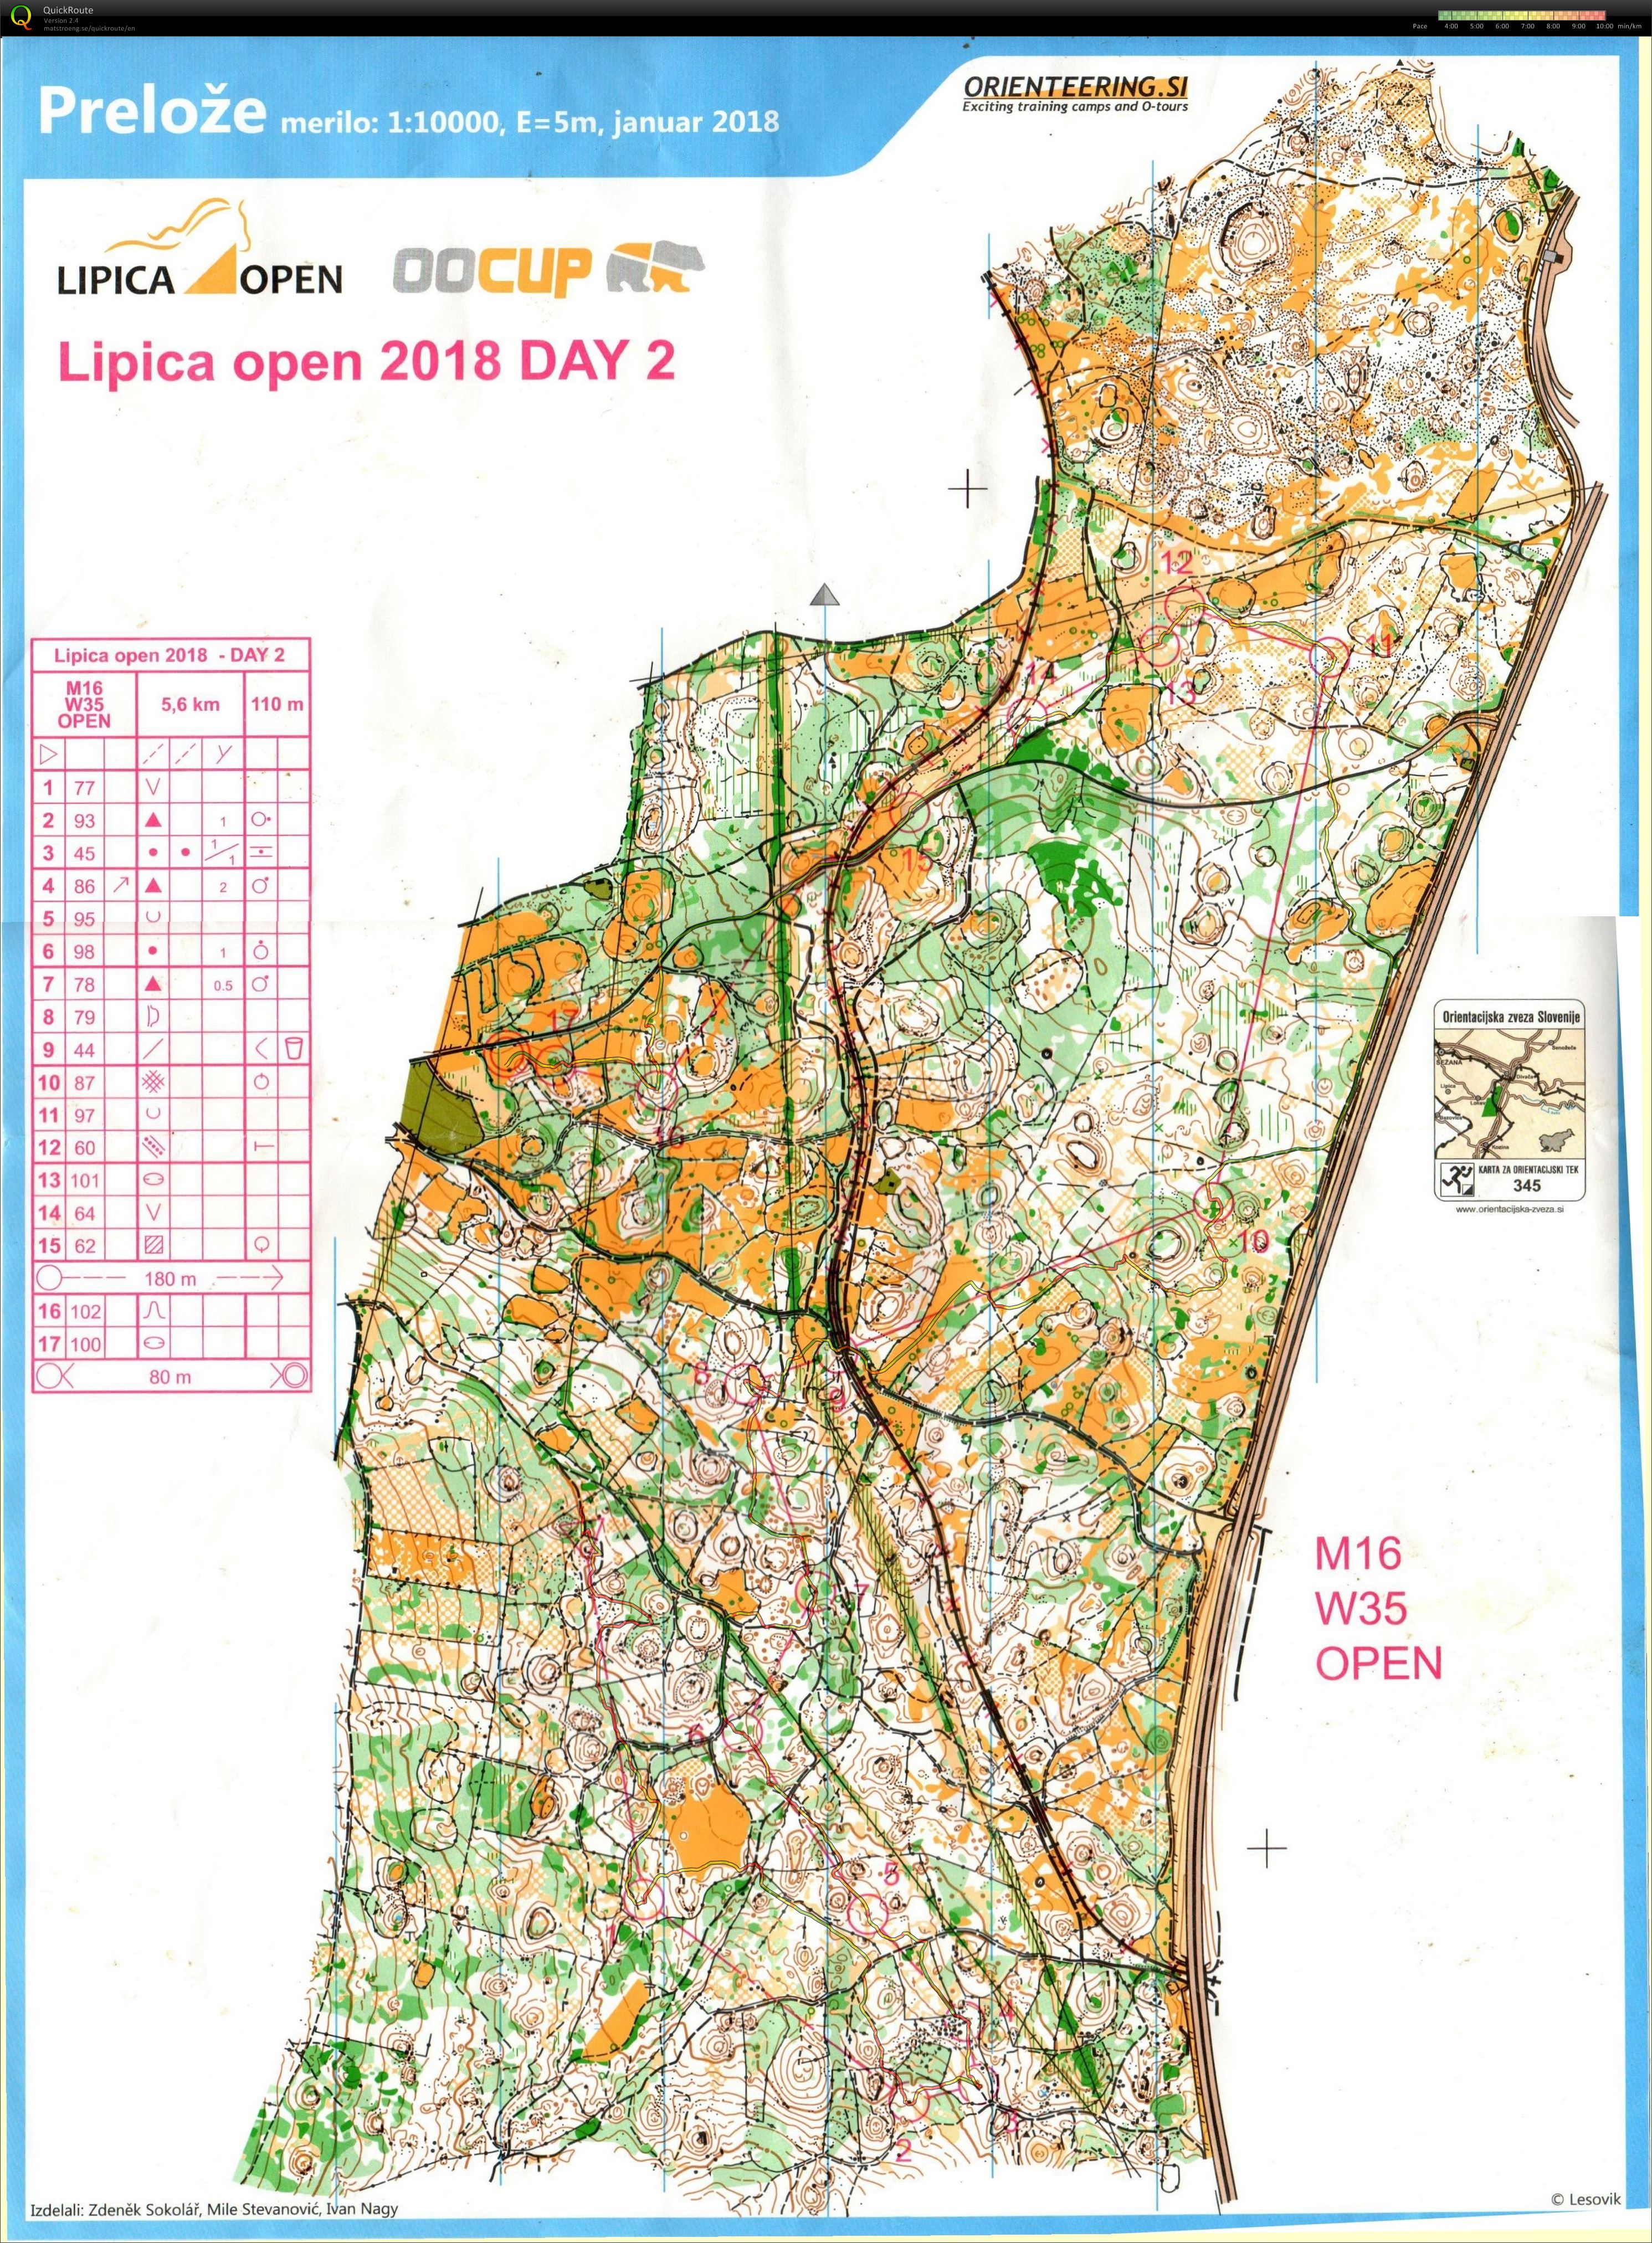 Lipica Open 2018 Day 2 (2018-03-11)